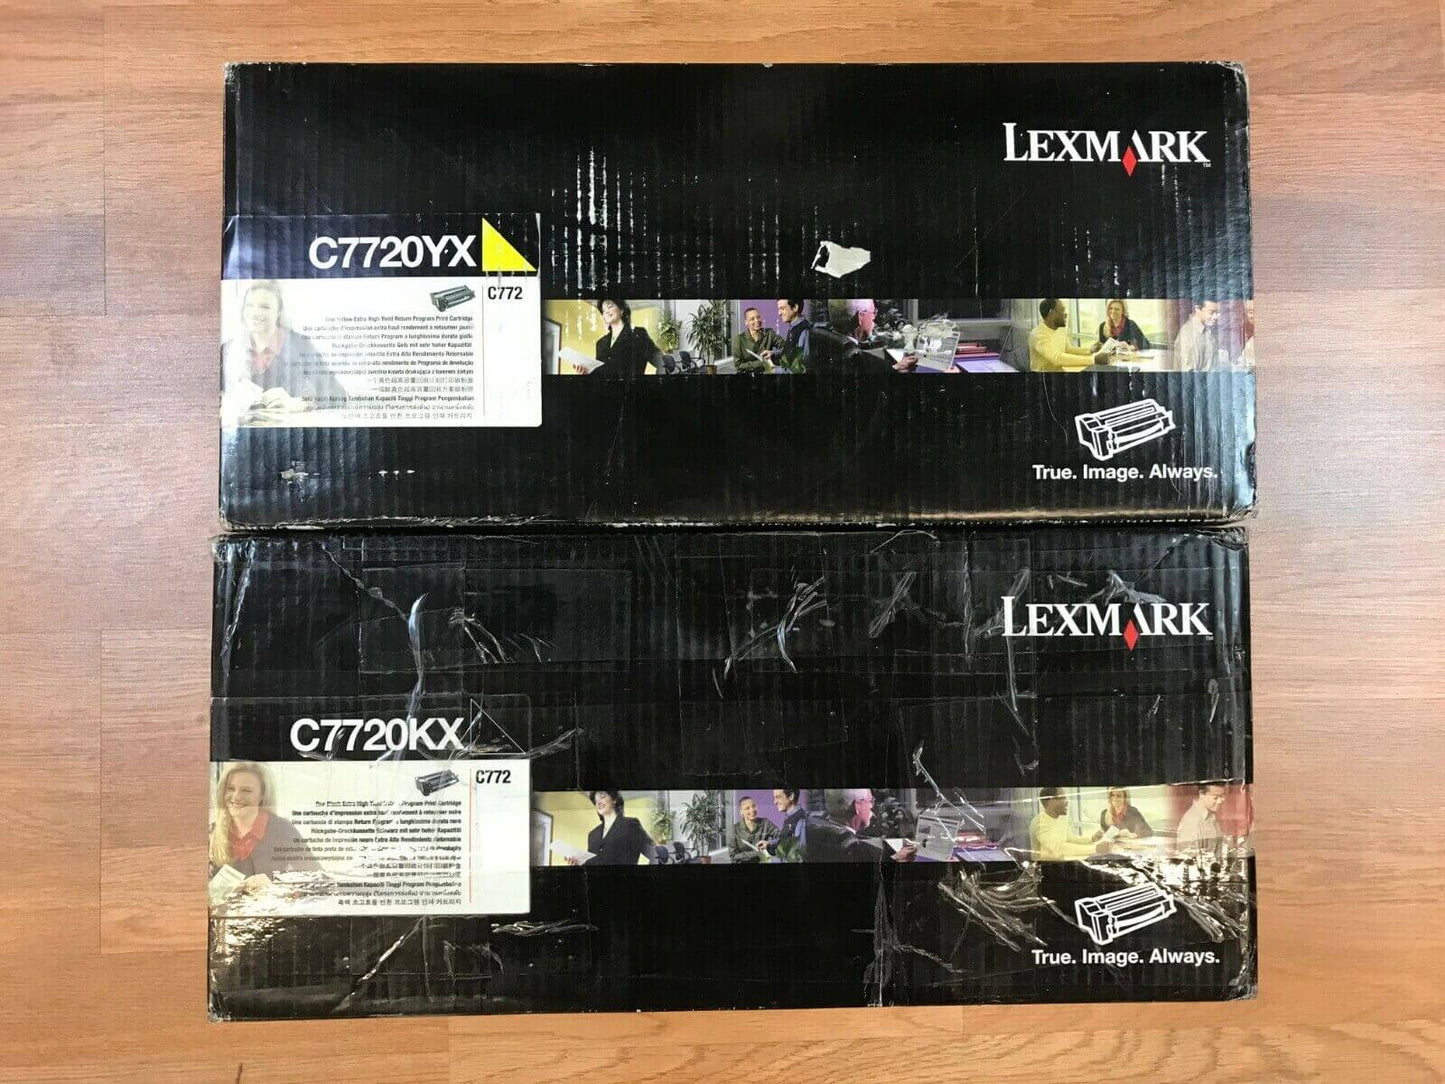 Lexmark C7720YX/KX YK Extra HY Toner Cart. For C772 Series *Same Day Shipping! - copier-clearance-center